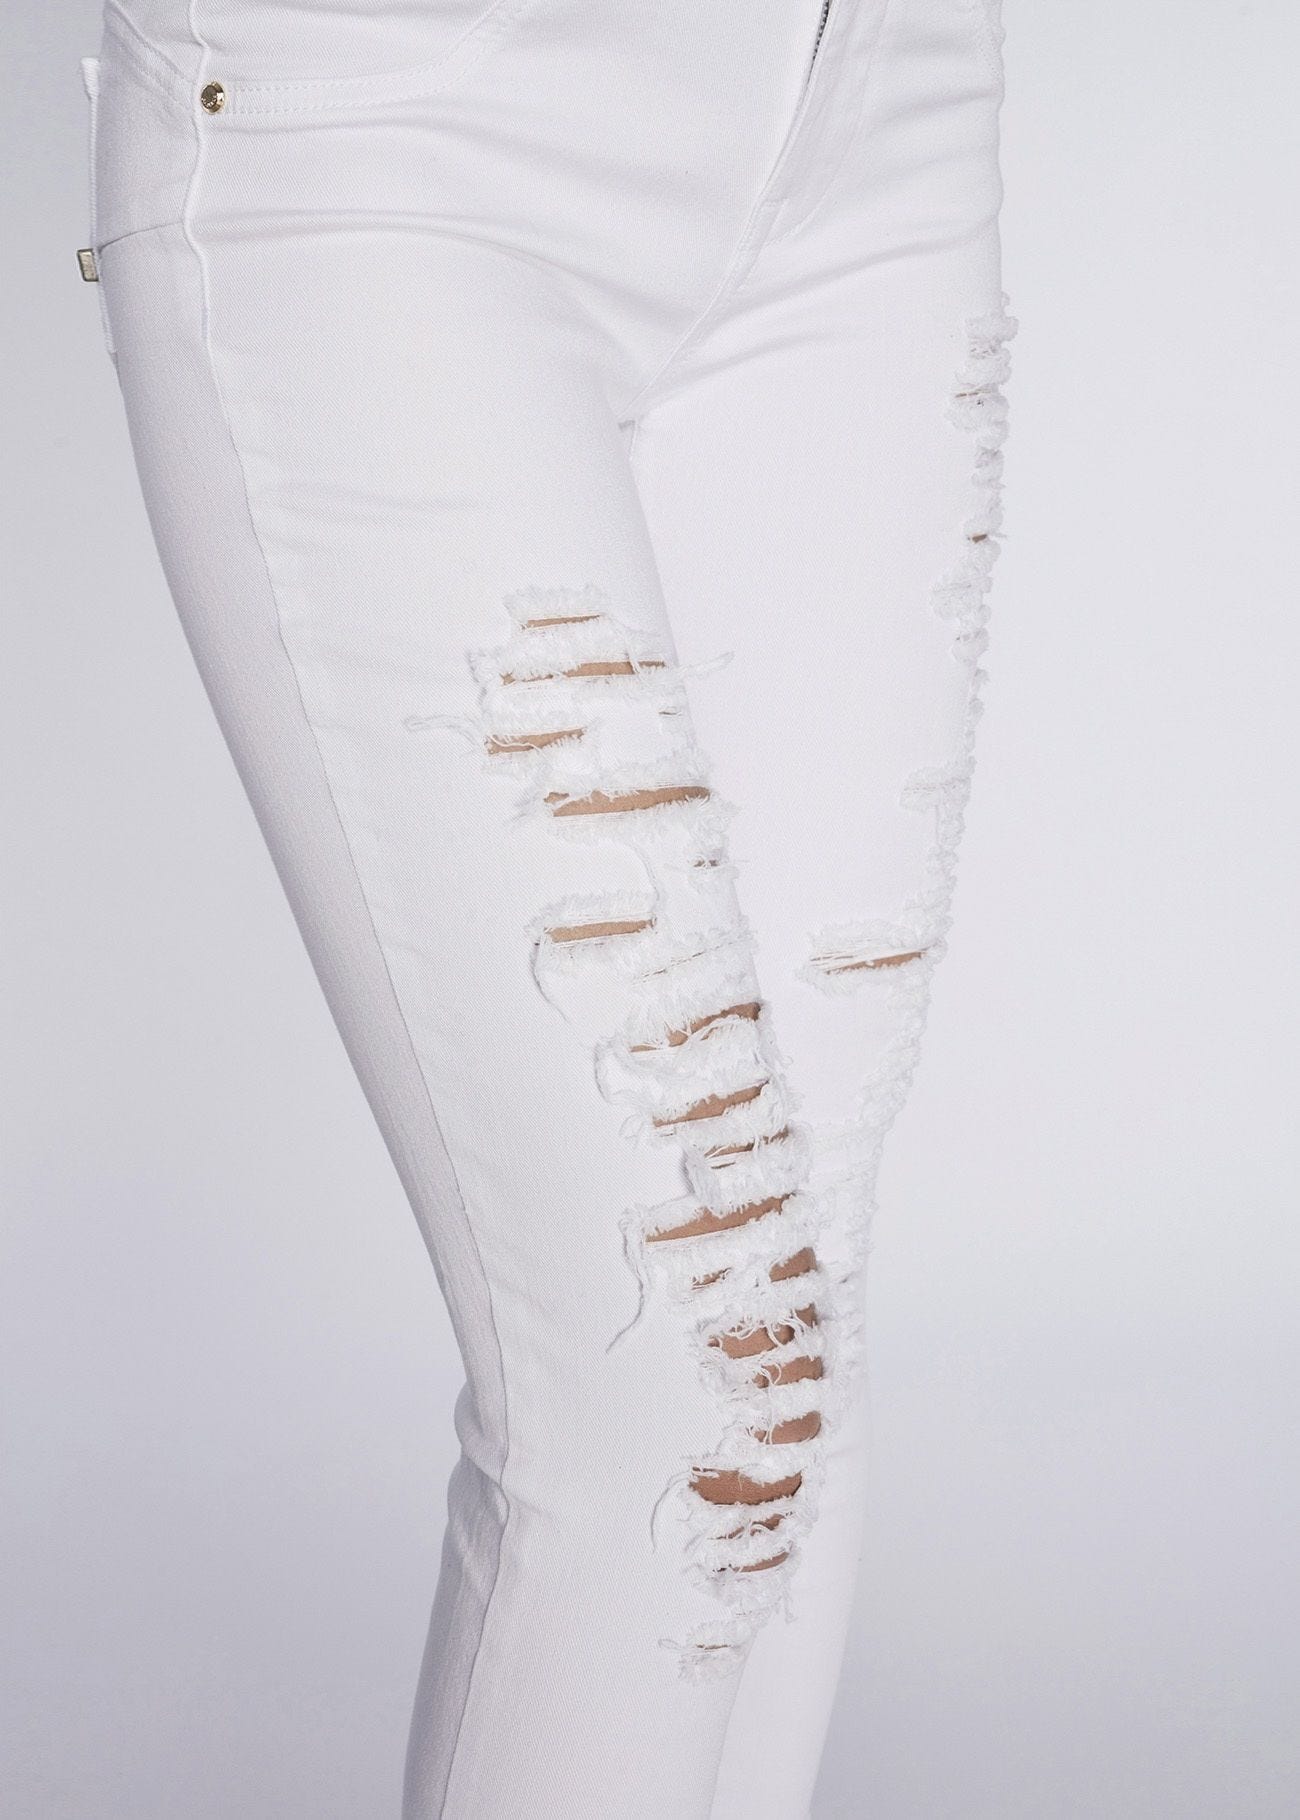 Skinny jeans with destroyed details 